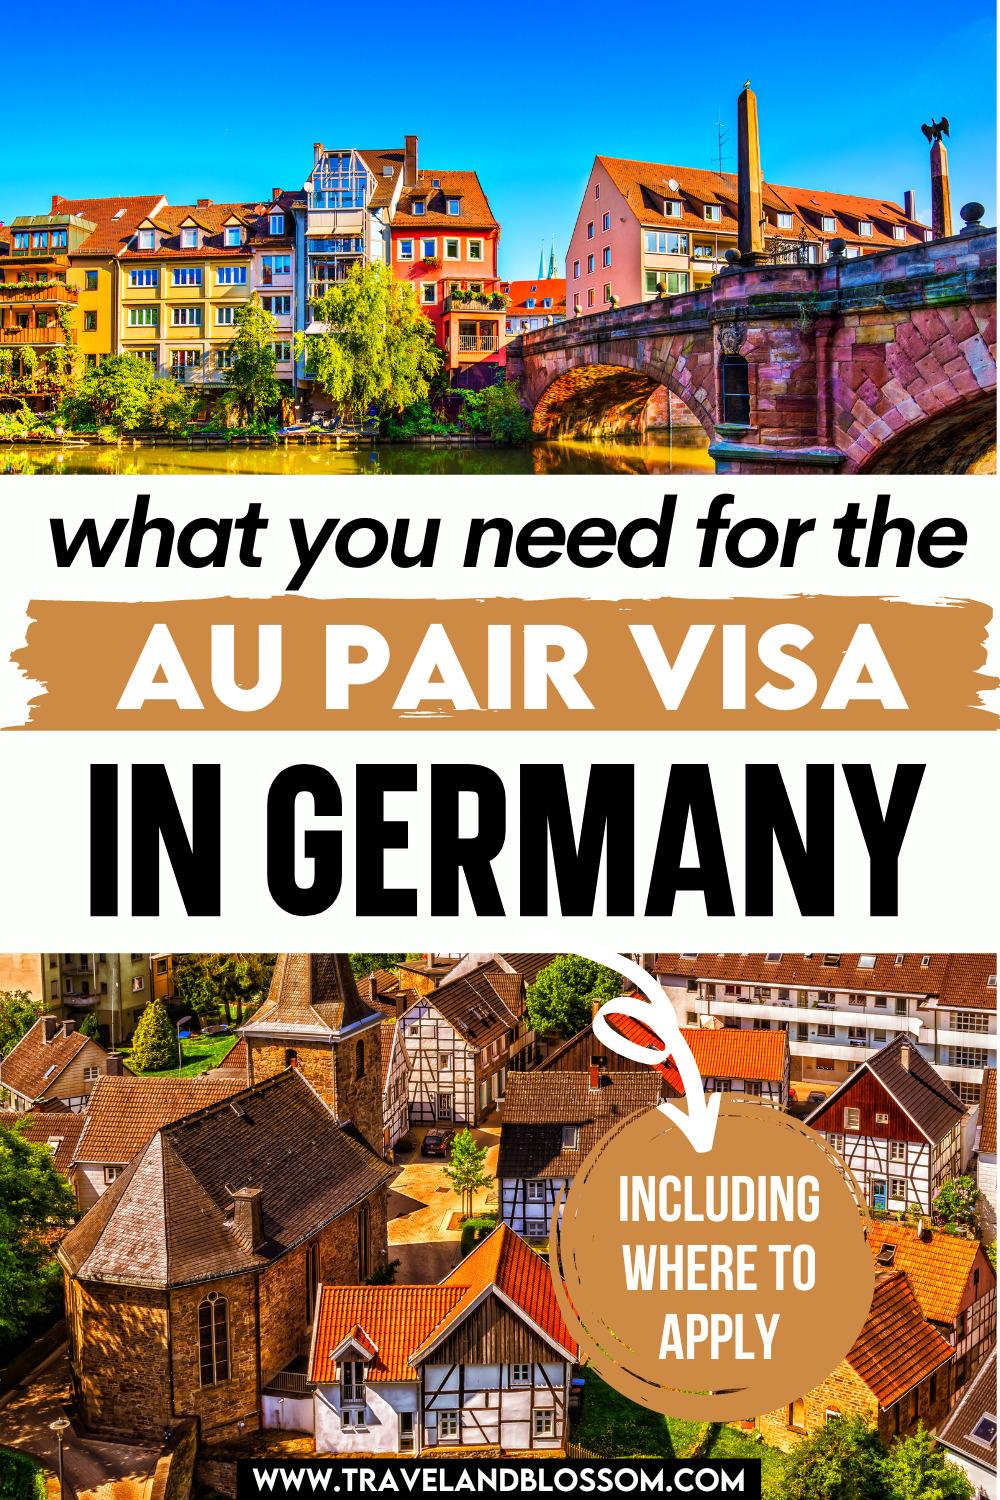 Au Pair Visa Germany: Requirements for Americans